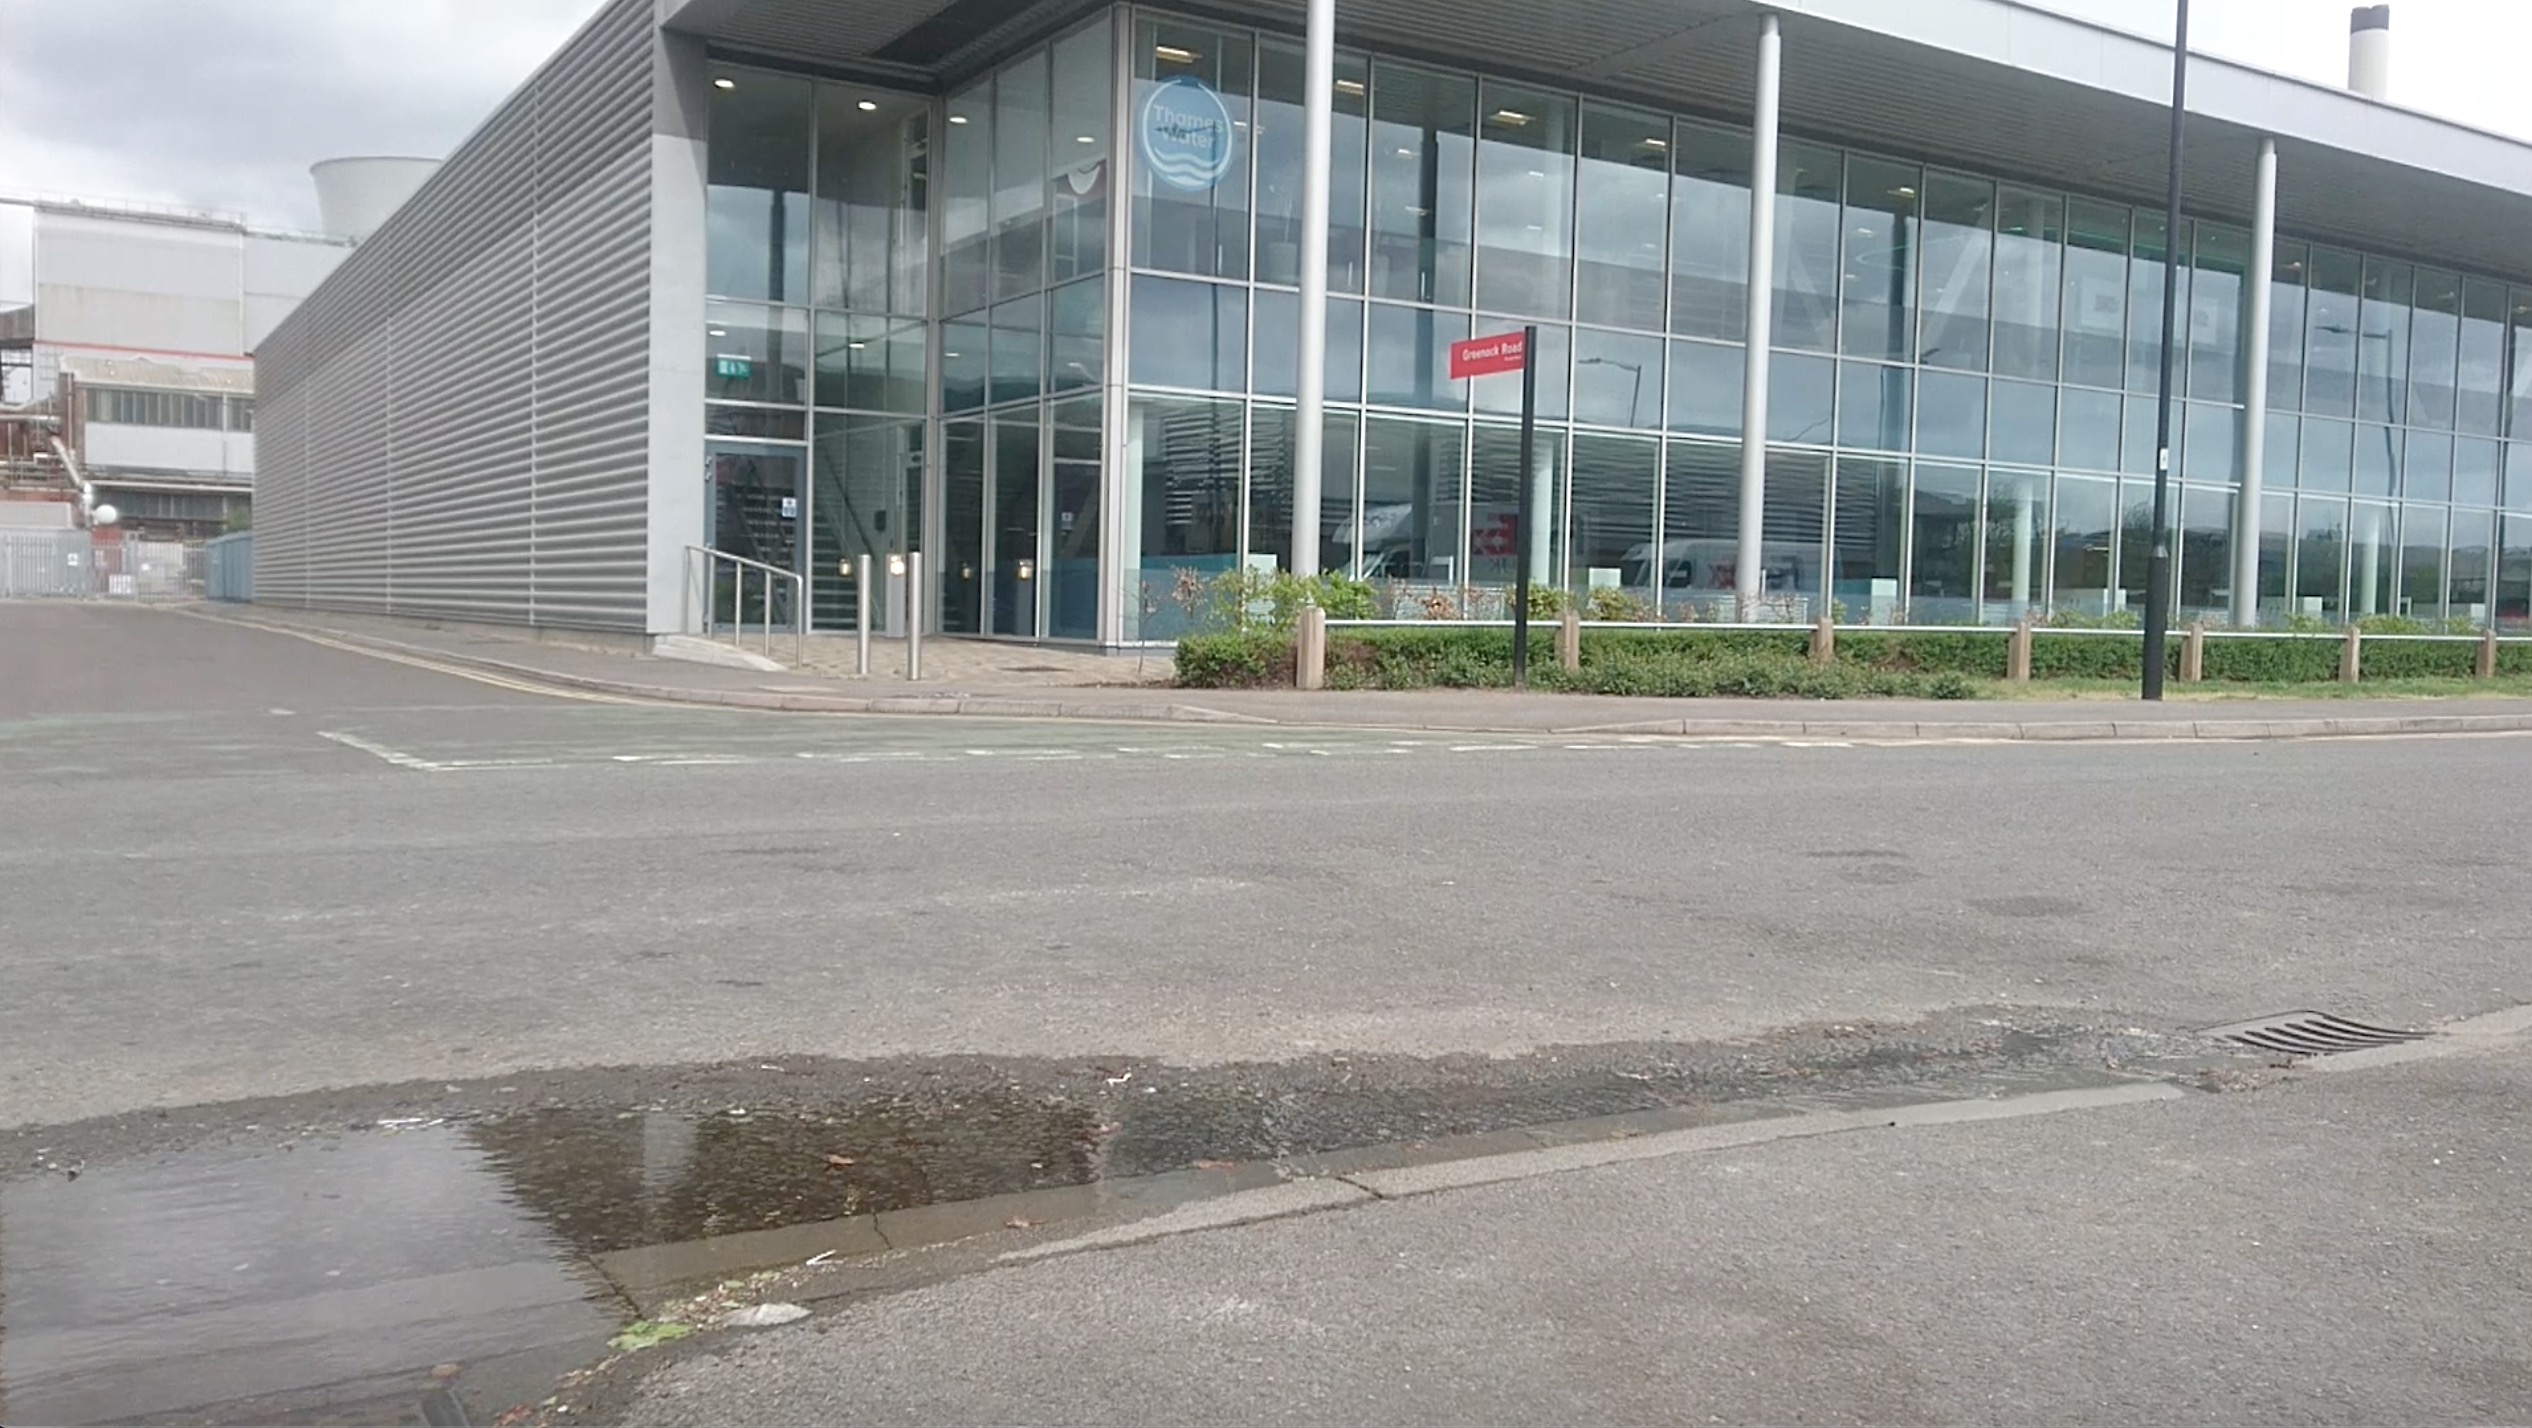 Water leak outside Thames Water's own offices leaves them red faced